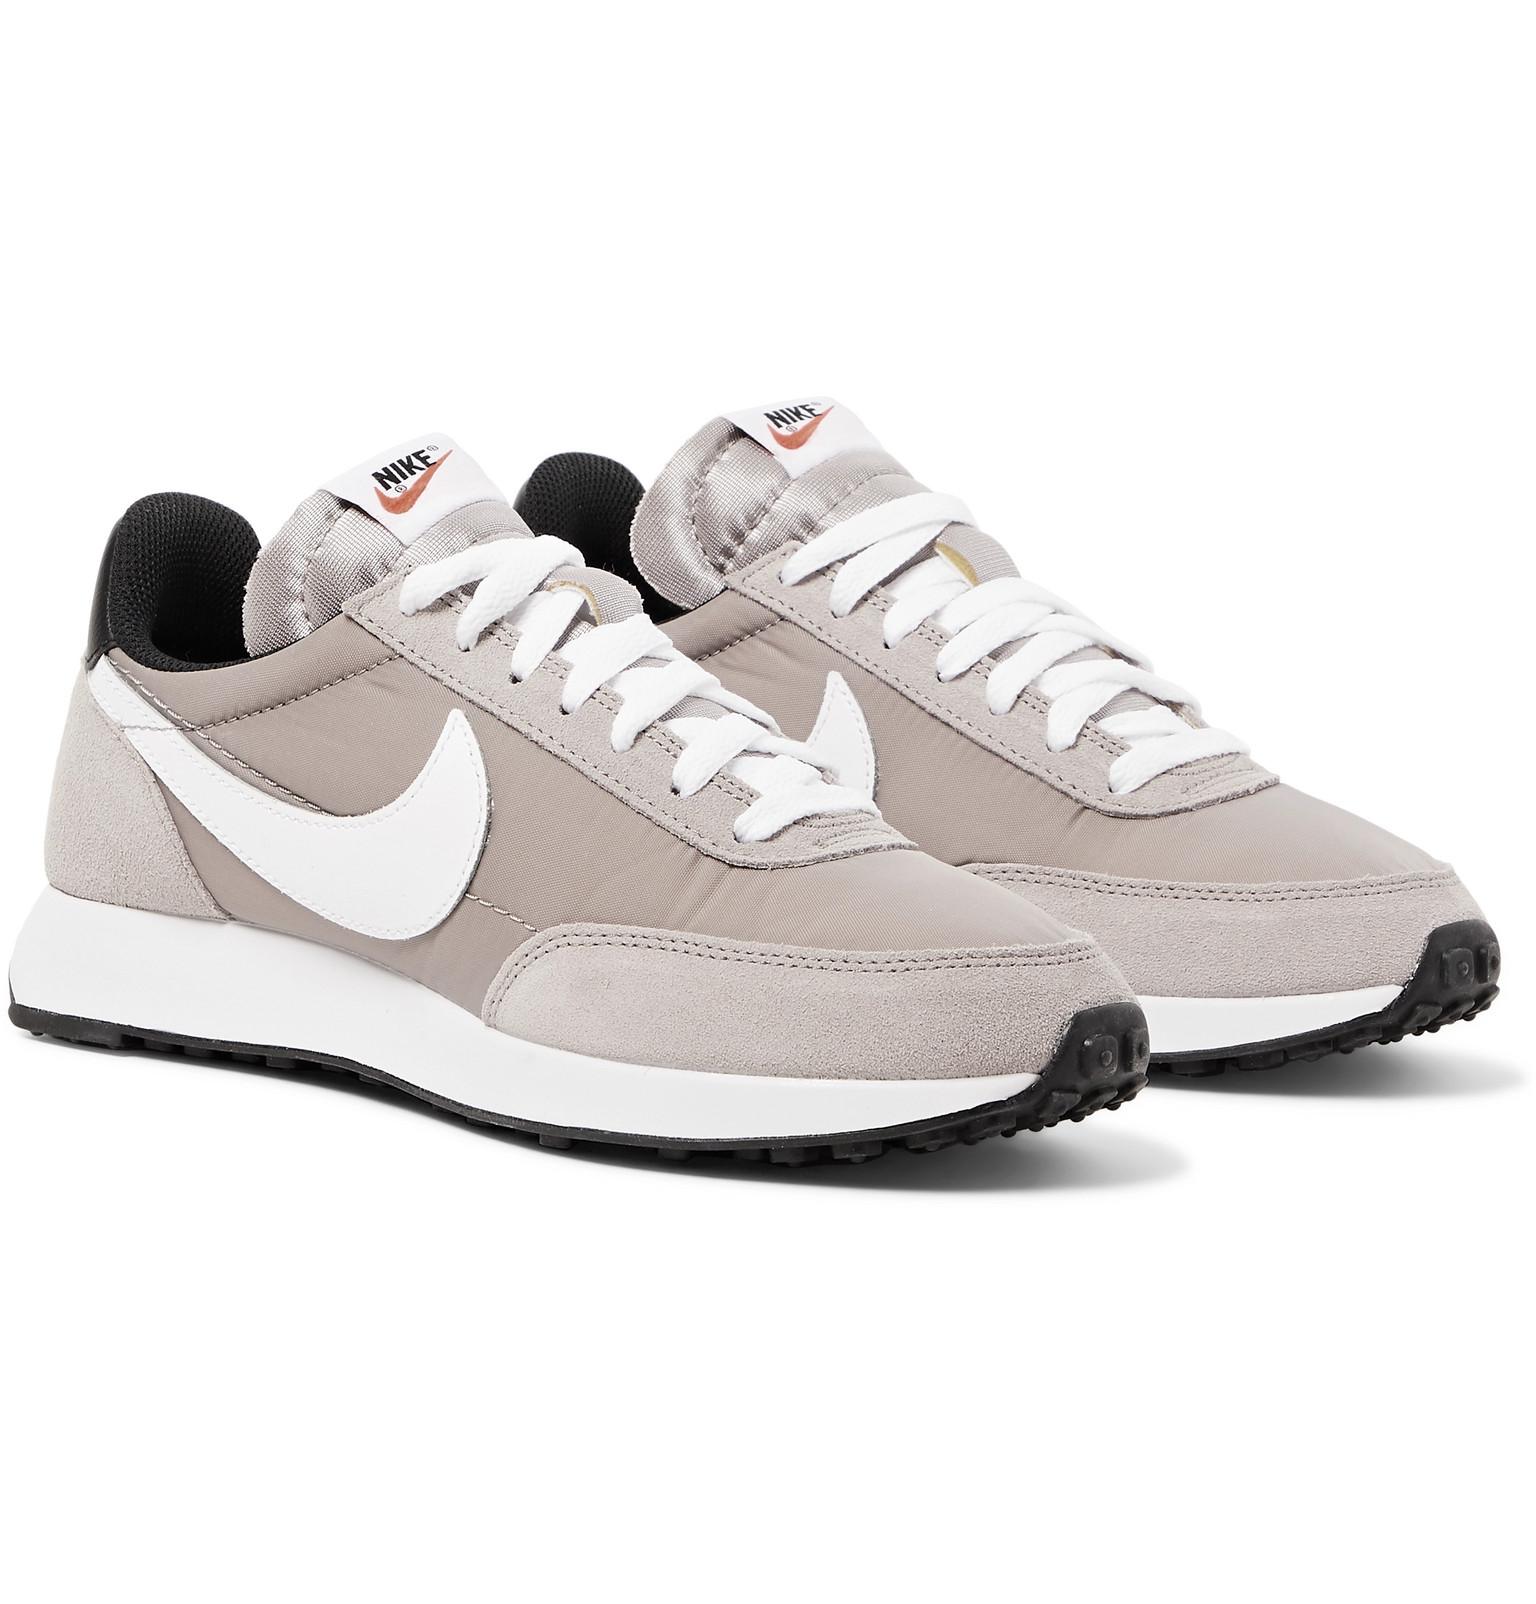 Nike Air Tailwind 79 Shell, Suede And Leather Sneakers in Gray for Men -  Lyst